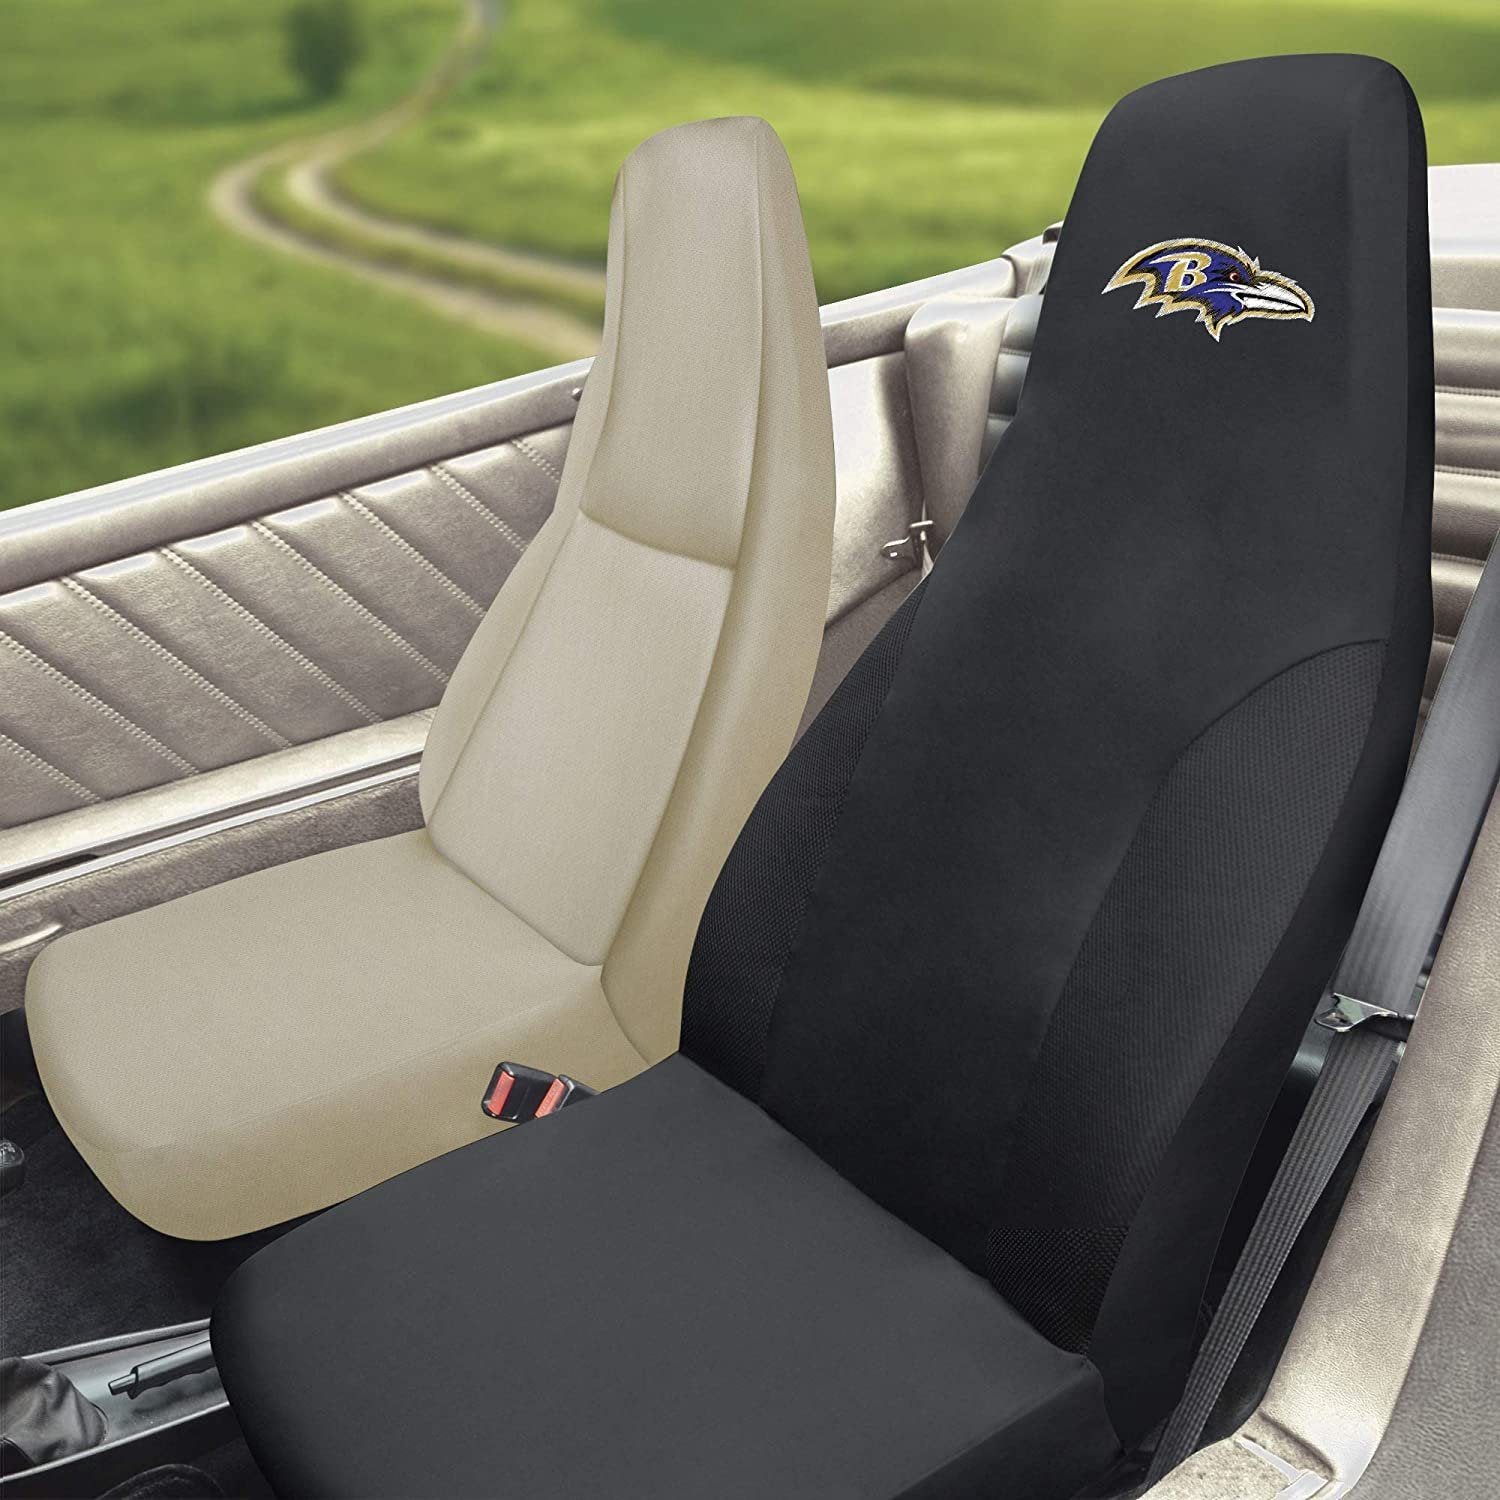 NFL Baltimore Ravens Embroidered Seat Cover, Black, 20"x48"